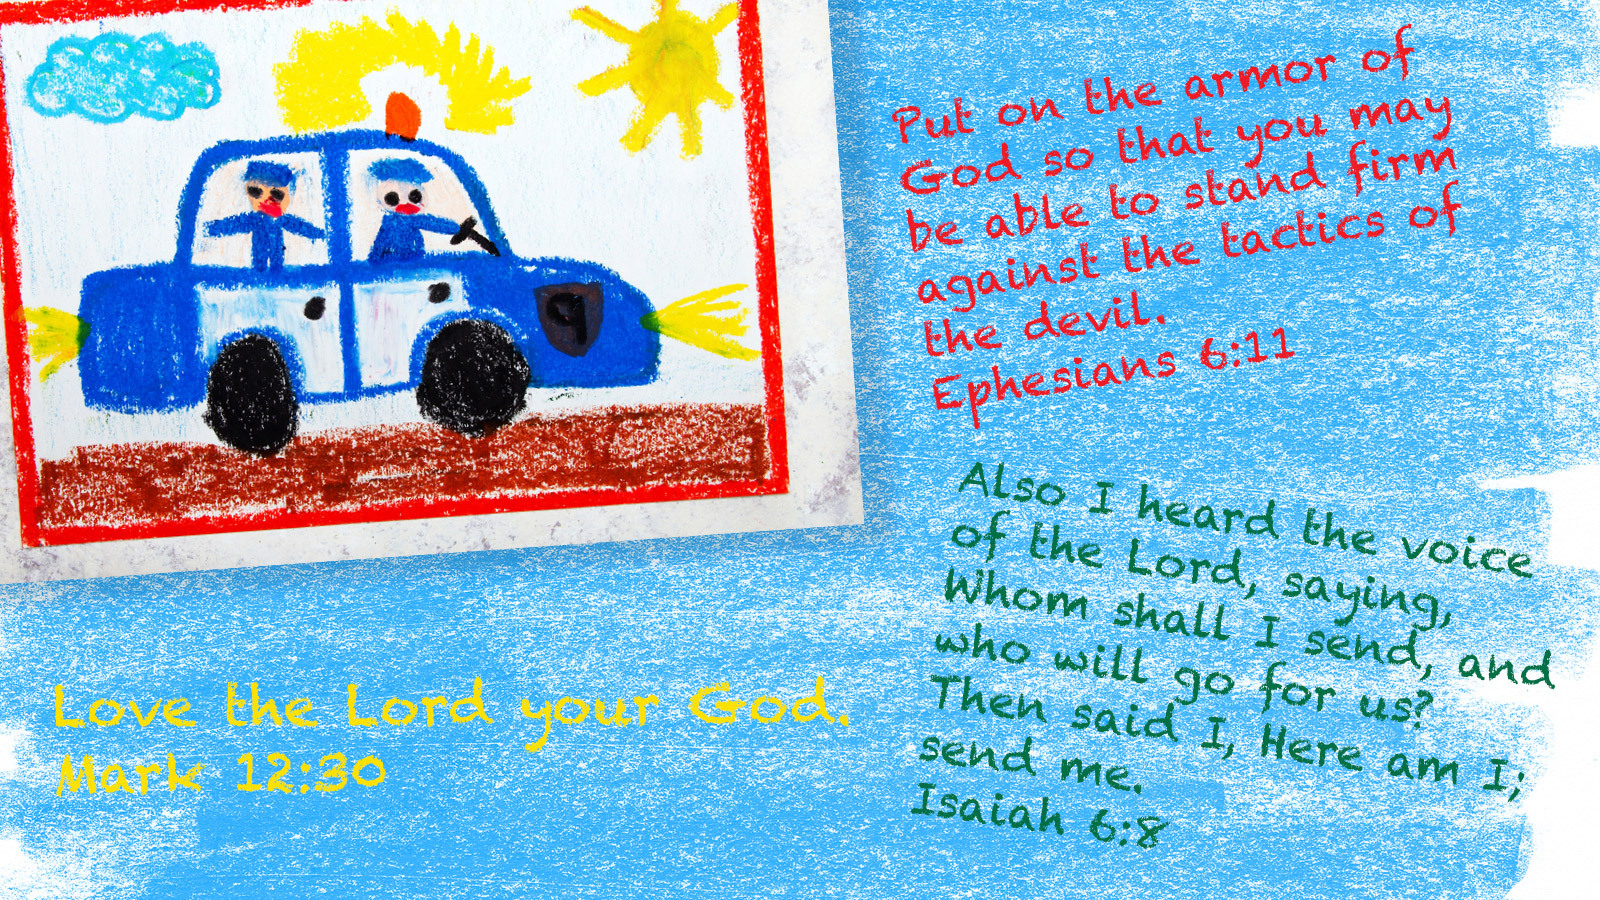 a crayon drawing of a police car with two officers and three Bible passages, also written in crayon